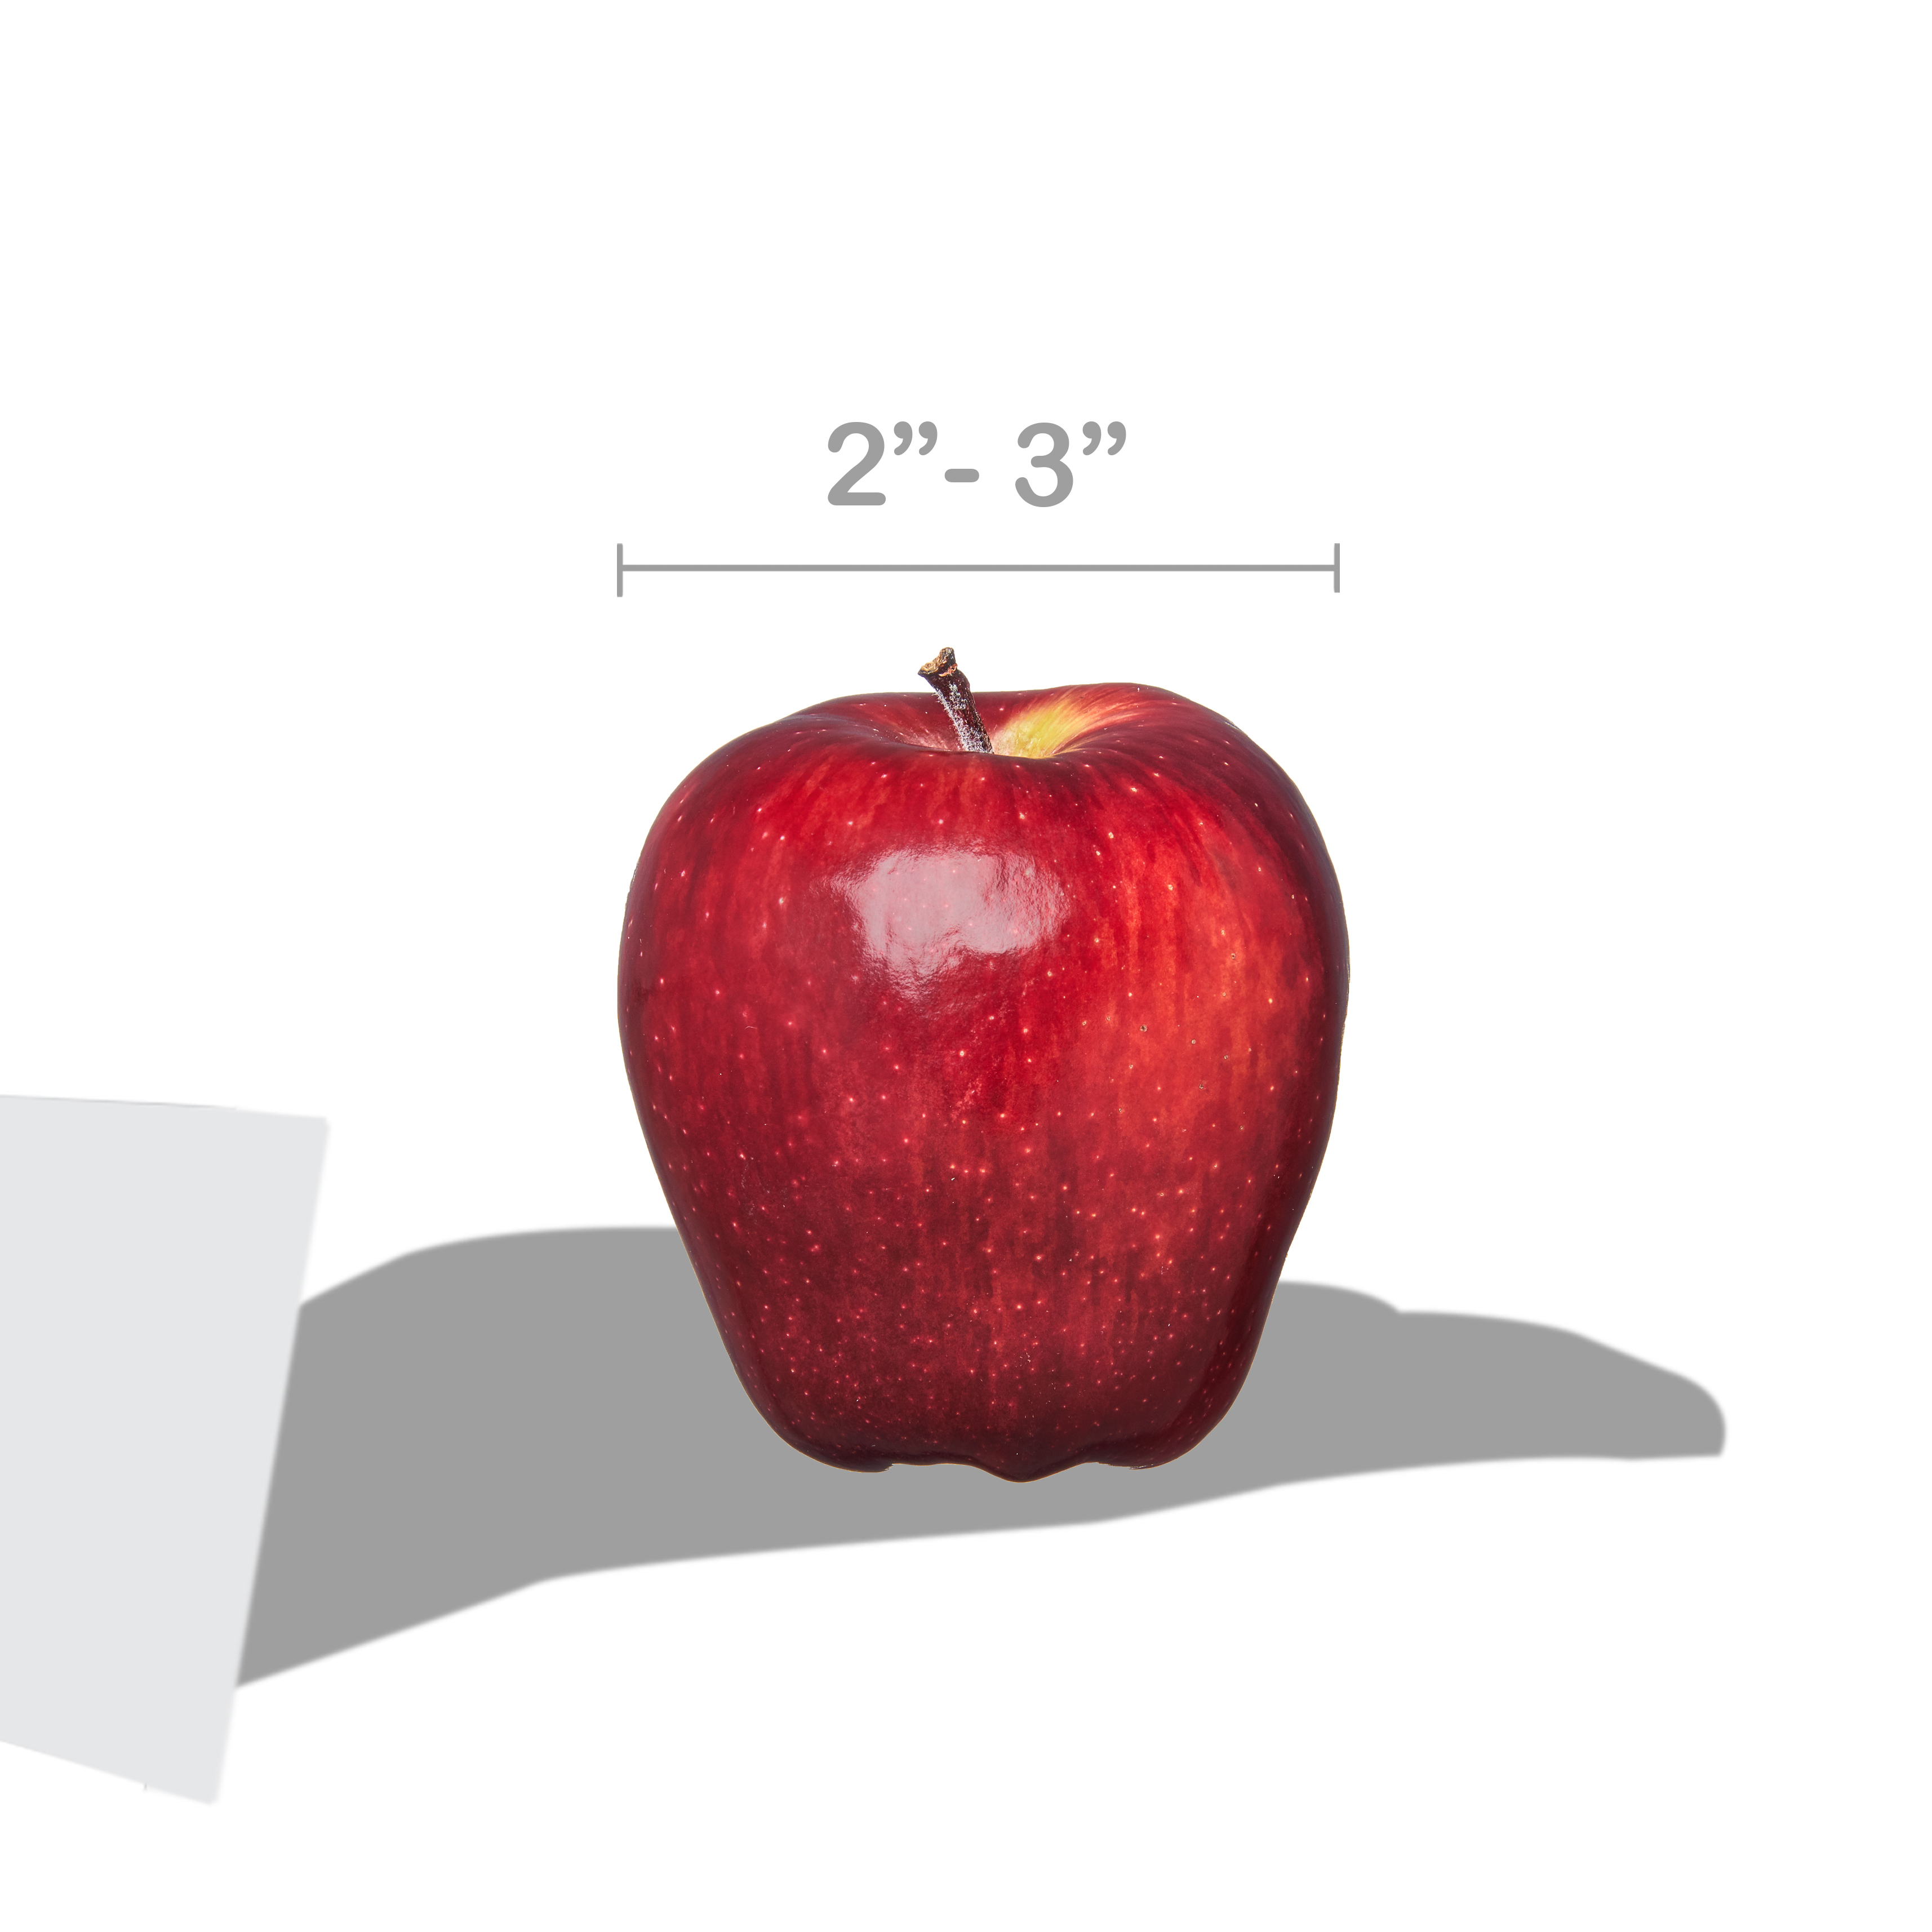 Fresh Red Delicious Apple, Each - image 4 of 7